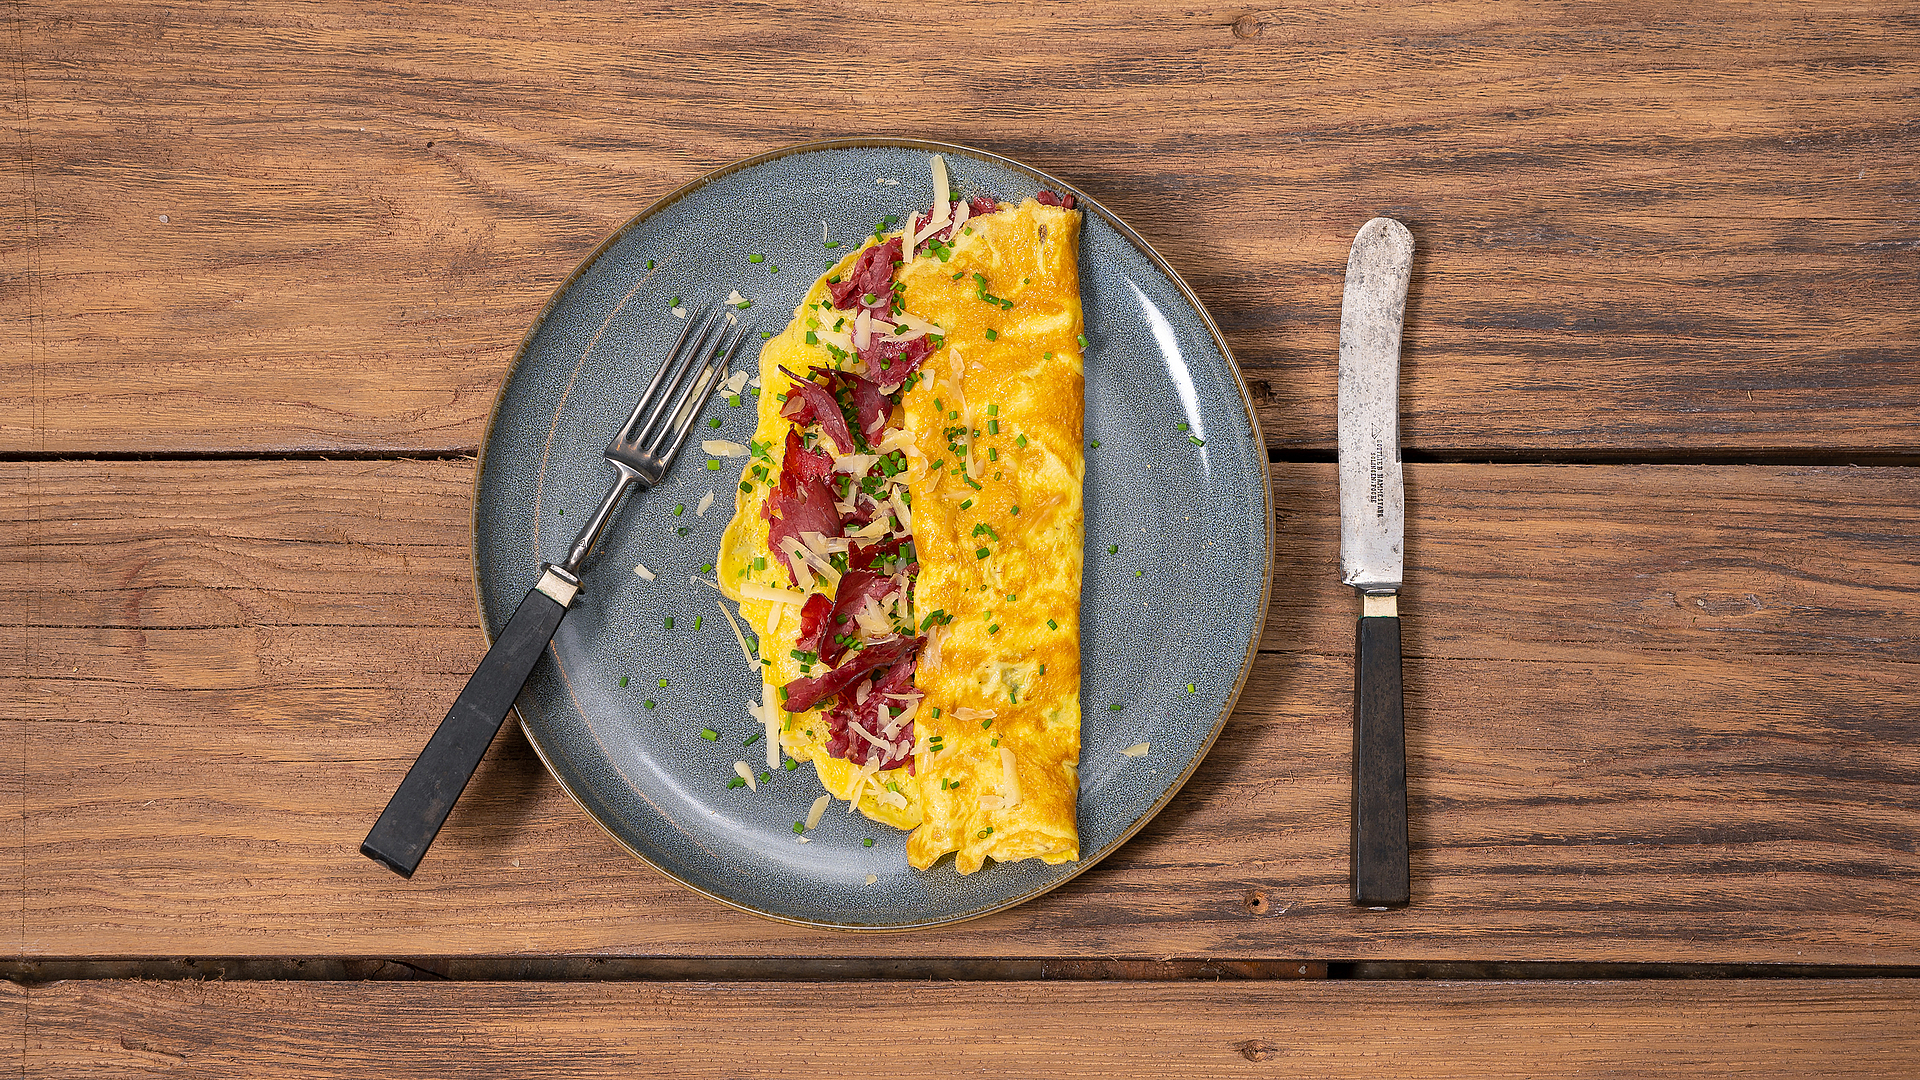 ham and cheese omelette recipe allrecipes on ham and cheese omelette recipe nz